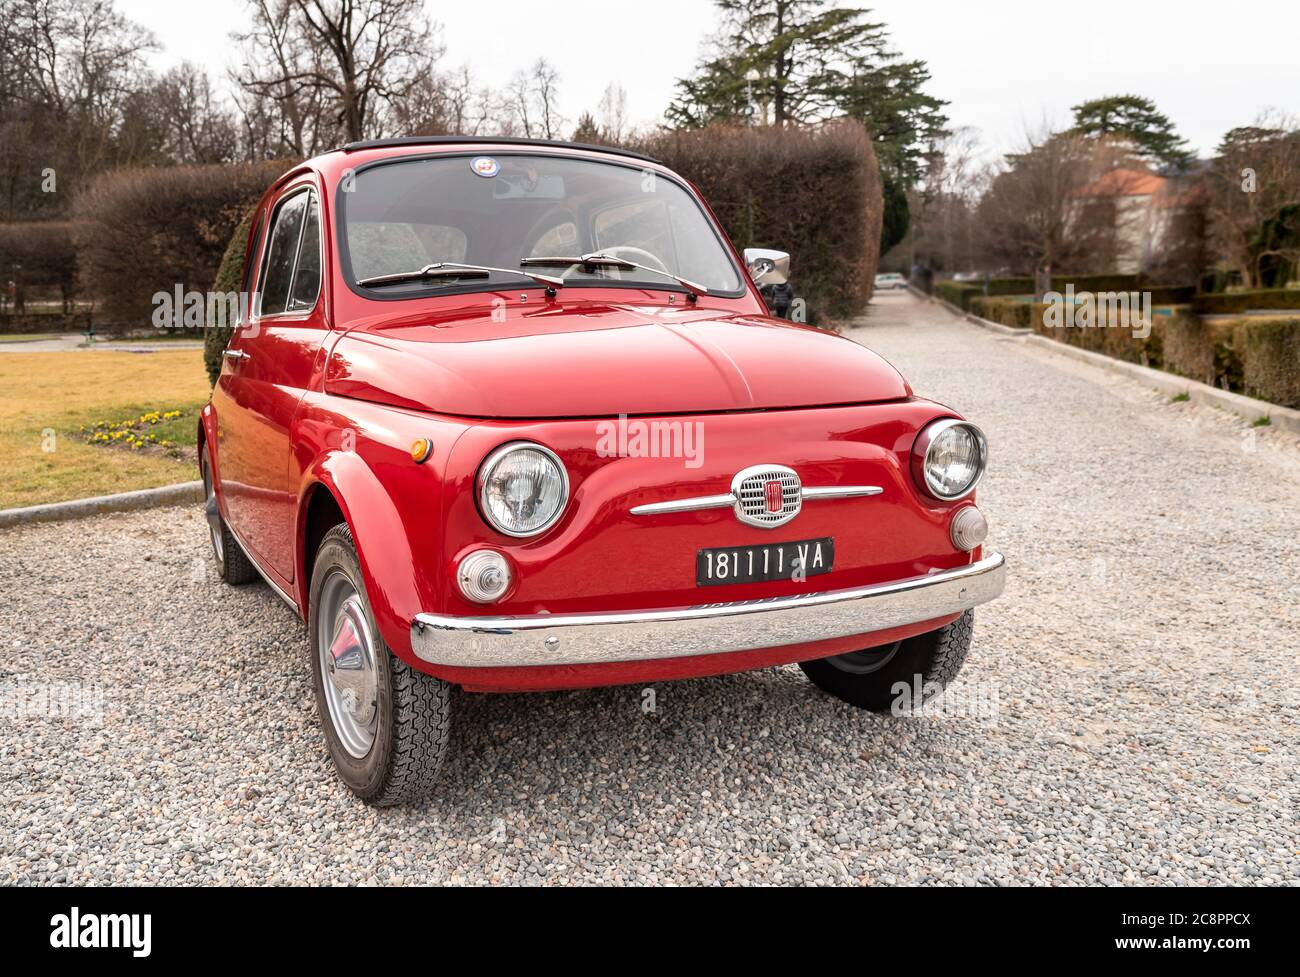 Varese, Italy - March 2, 2019: The front of the Red Classic Vintage Italian Fiat 500, parked in the historic center of Varese, Italy Stock Photo